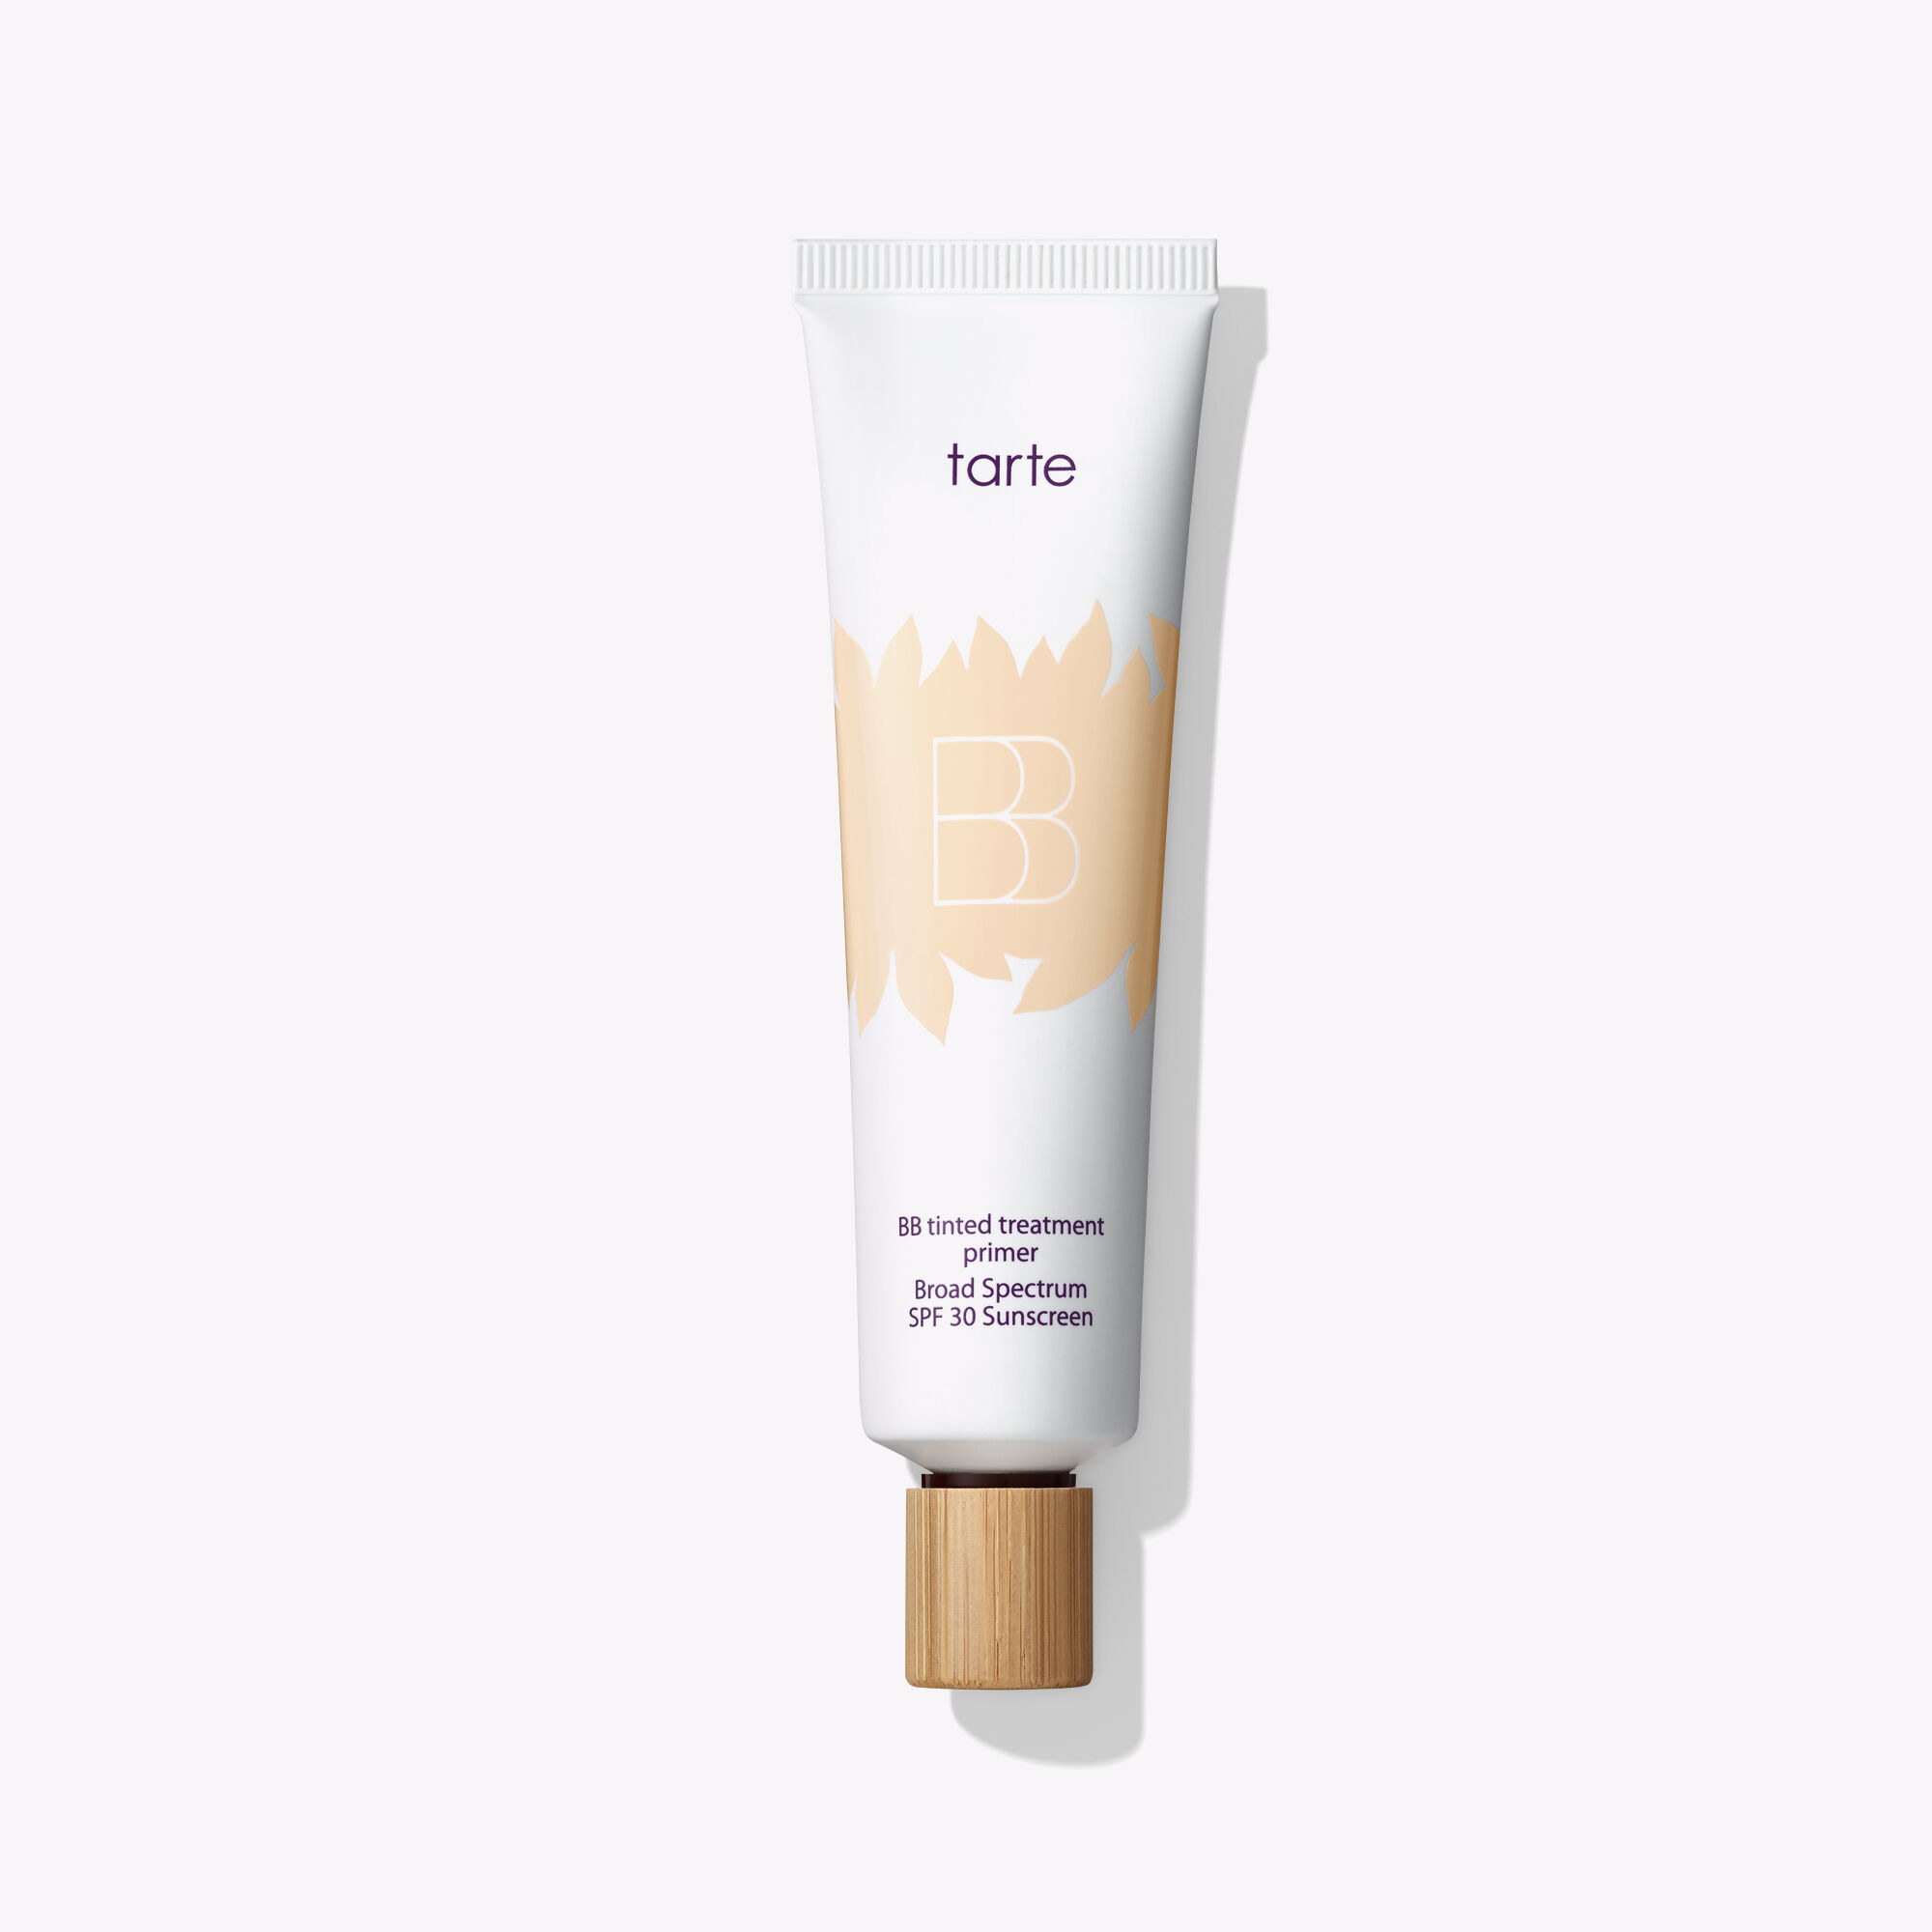 A bottle of the BB Tinted Treatment Primer.